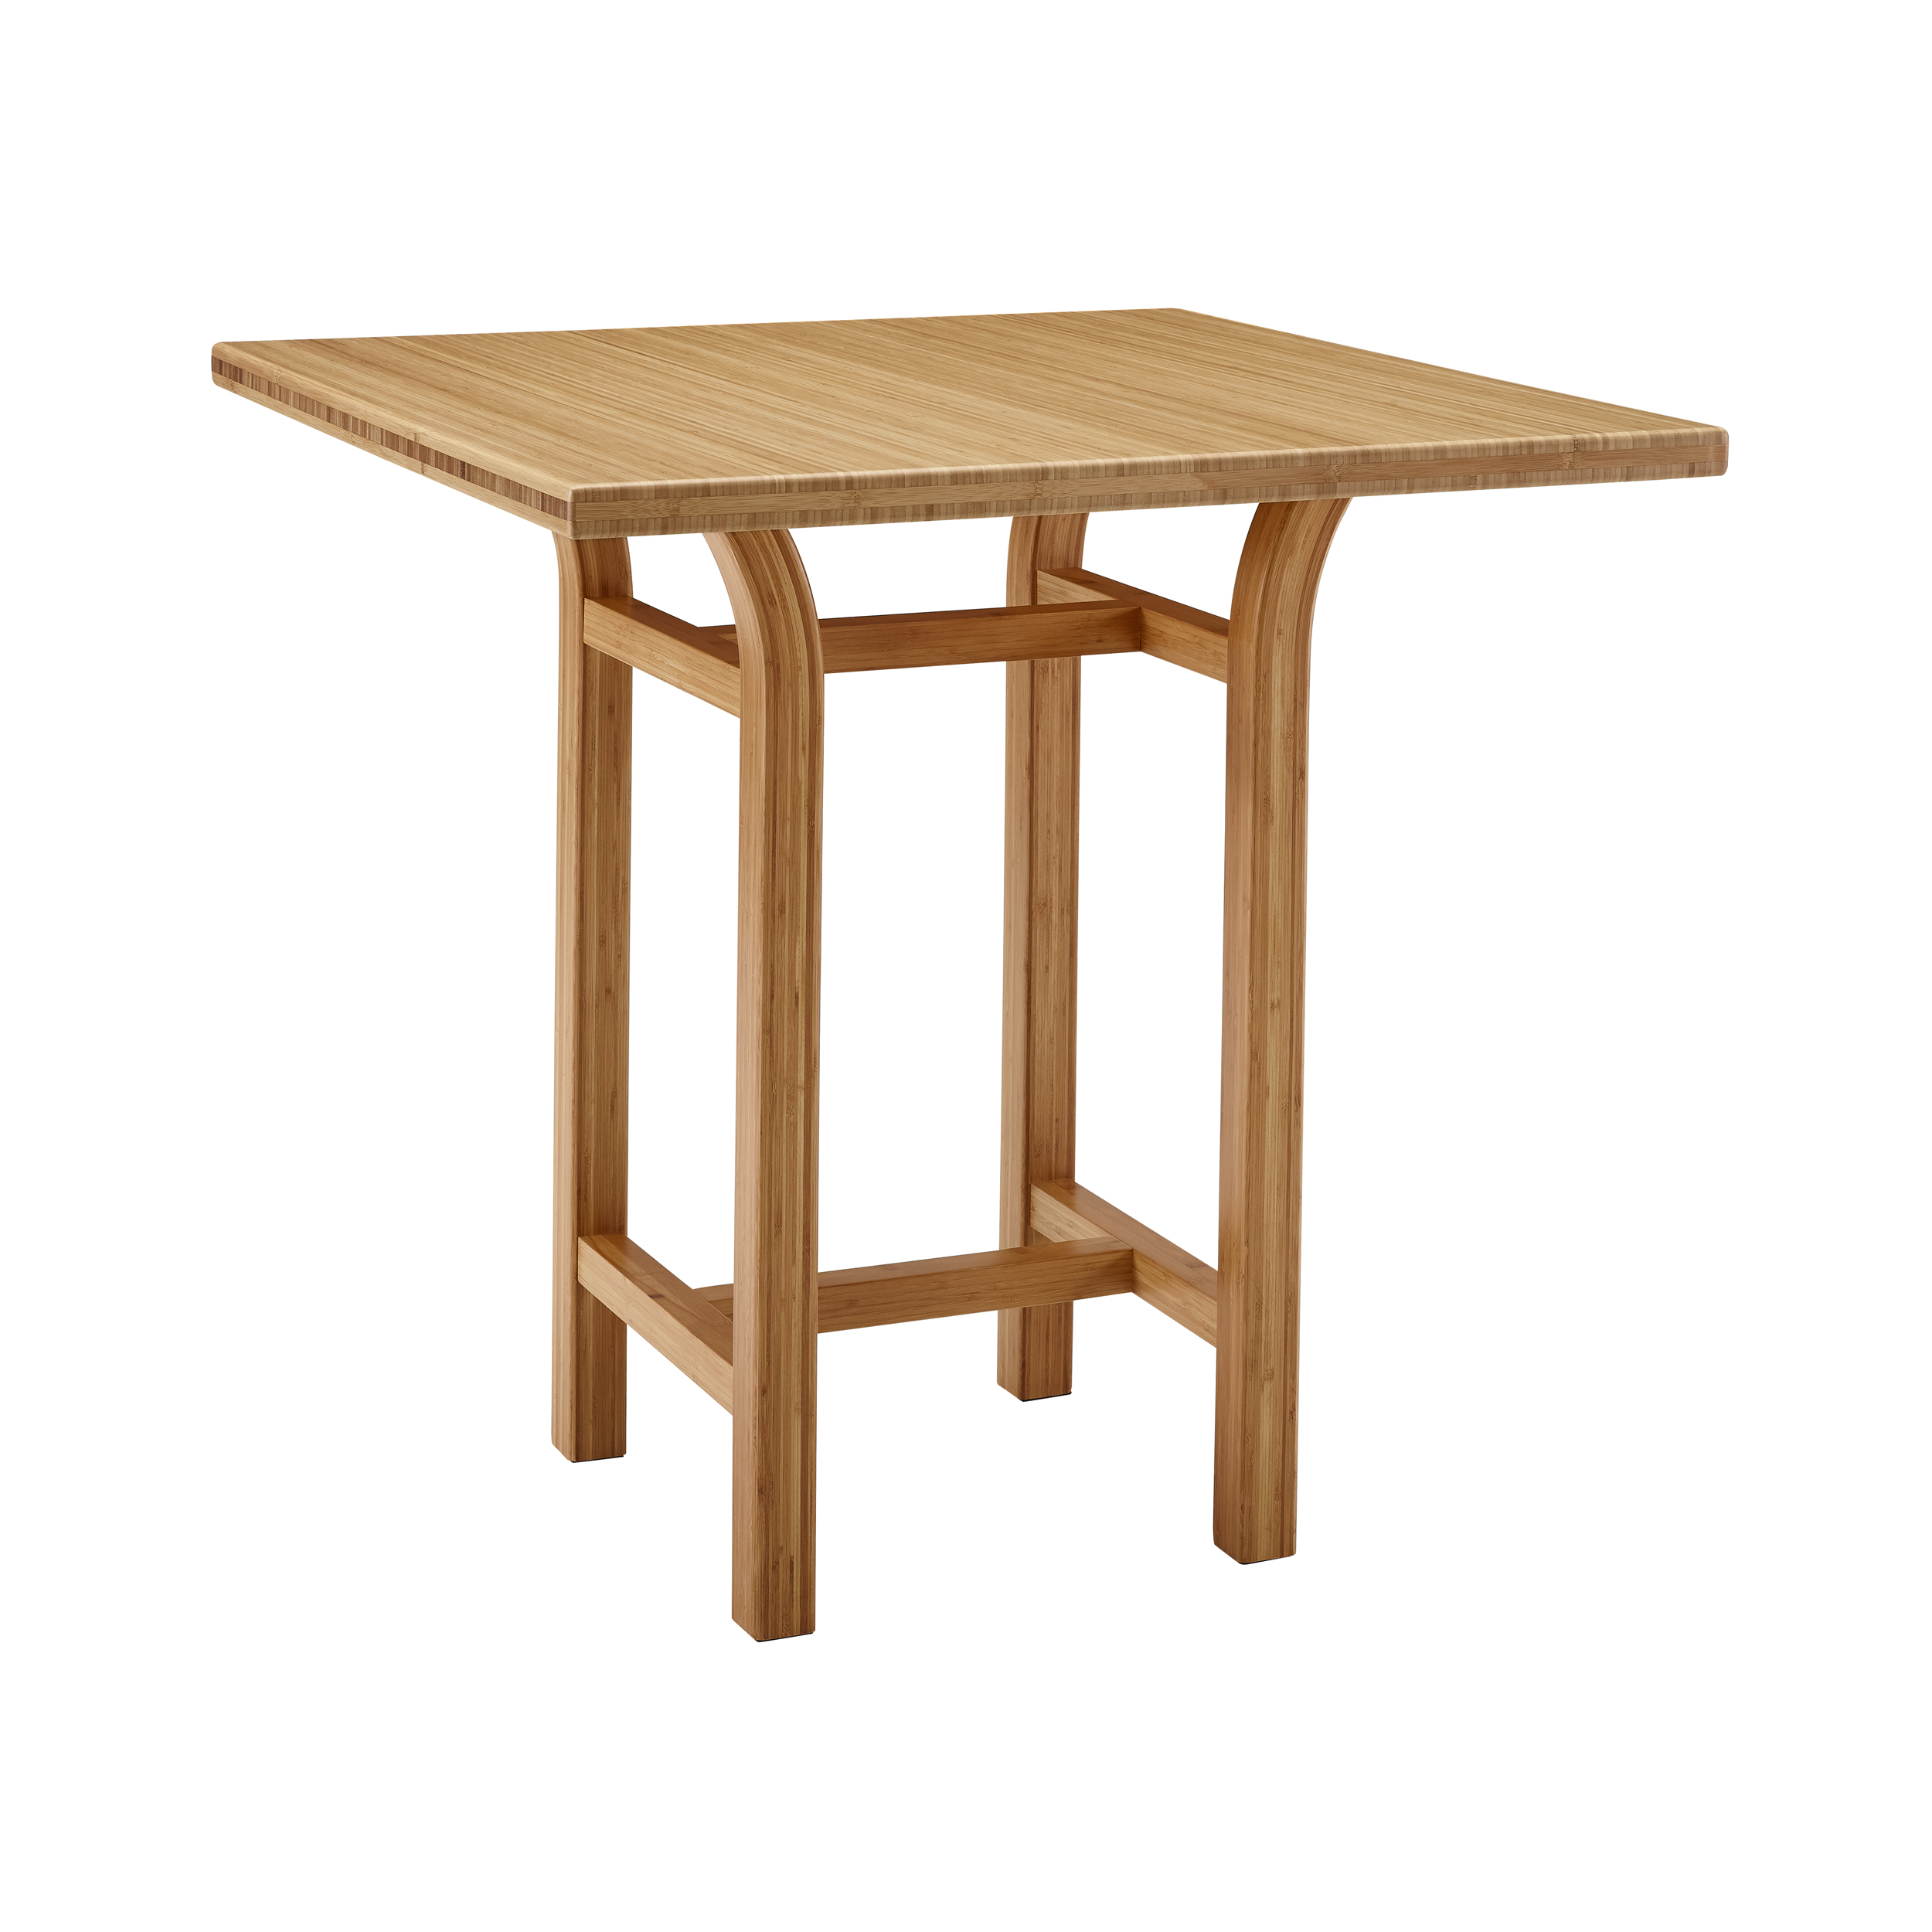 Solid Bamboo counter height square table